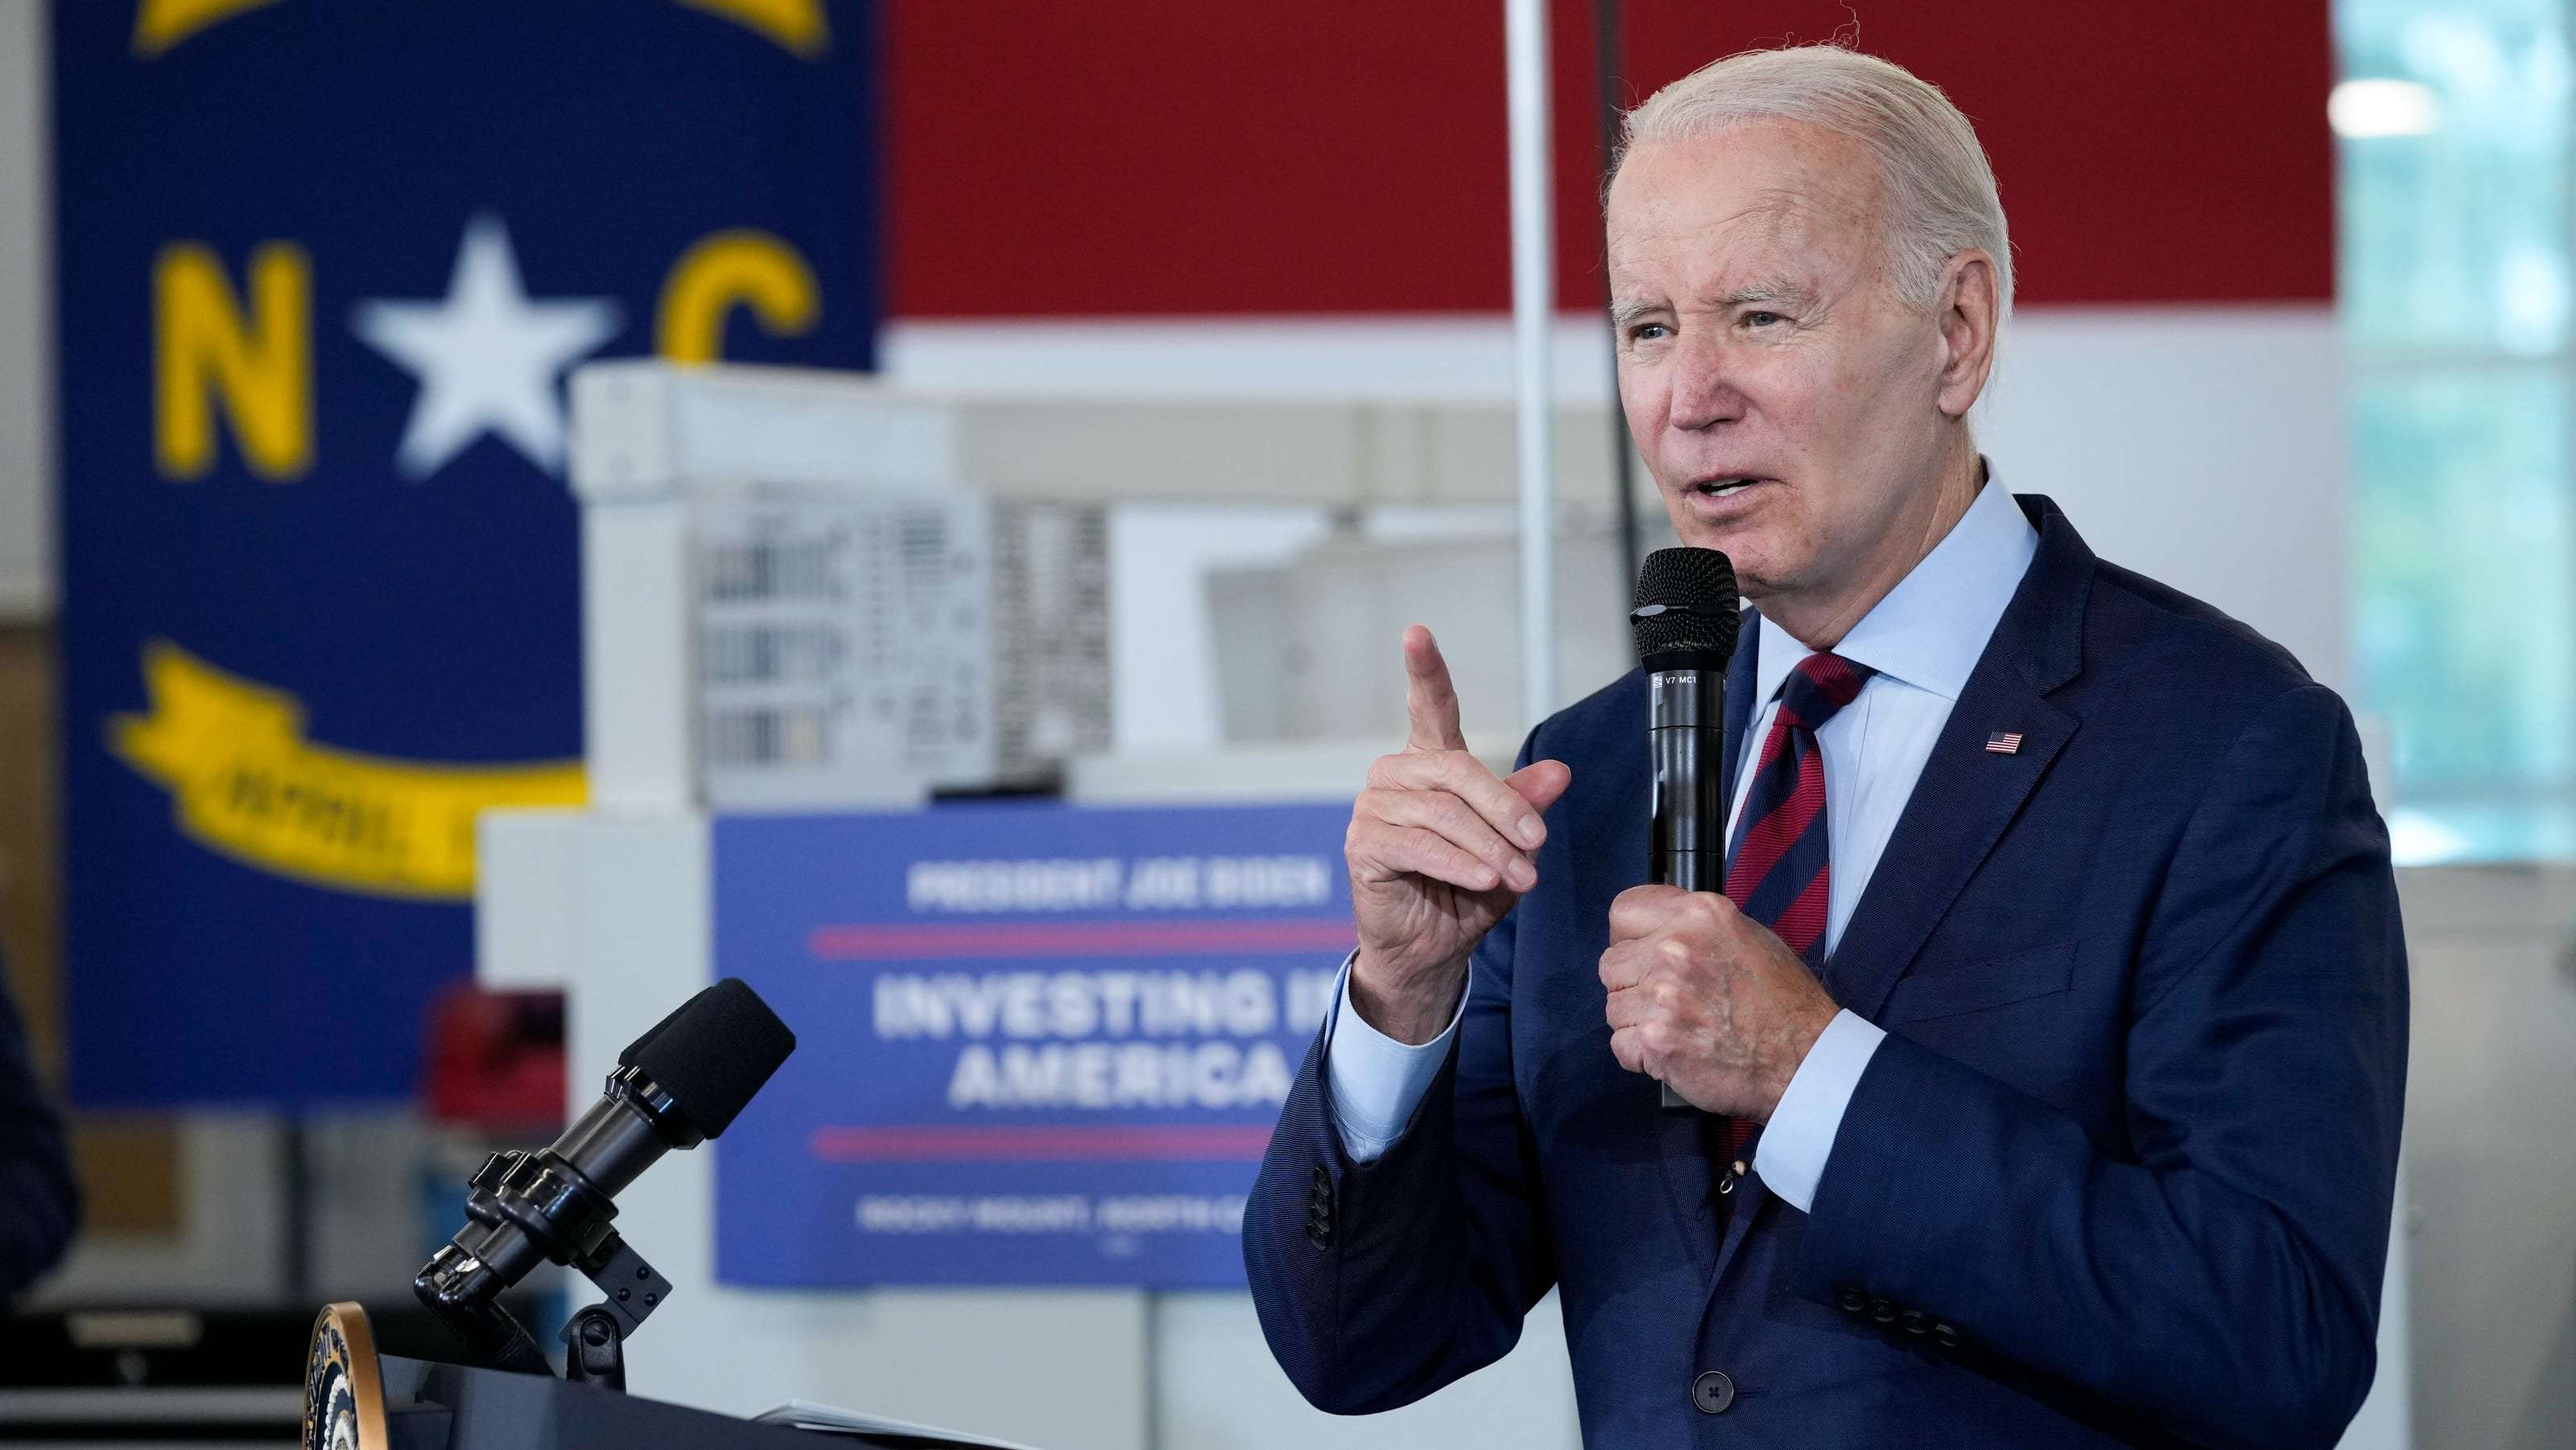 image for The next Georgia? Biden campaign targets North Carolina to reshape 2024 electoral map